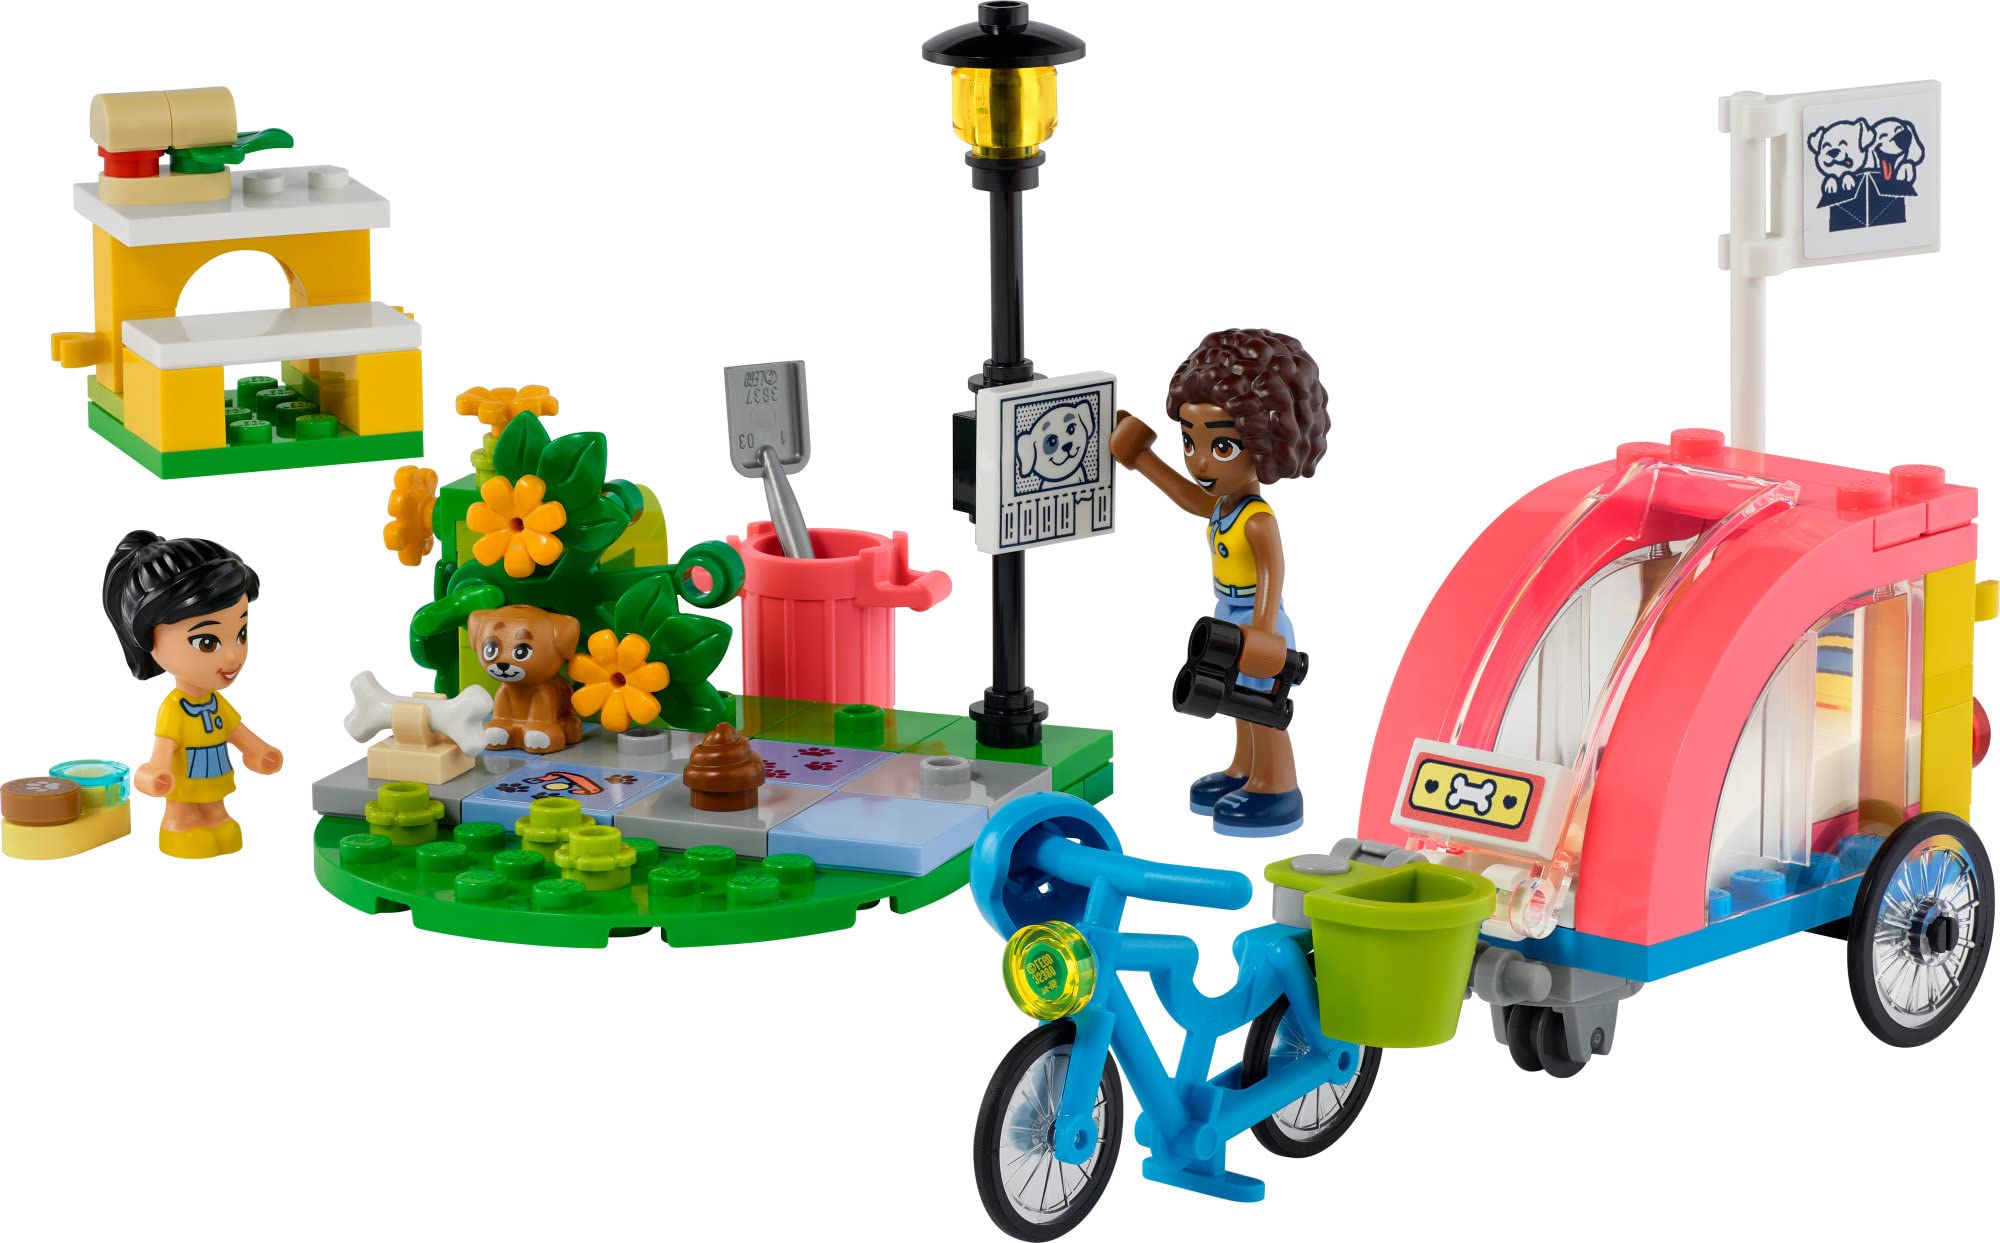 LEGO Friends Dog Rescue Bike Building Set 41738, Pretend Play Animal Playset for Pet-Loving Kids, Girls and Boys Ages 6+ Years Old with Puppy Pet Figure and 2 Mini-Dolls, 2023 Series Characters